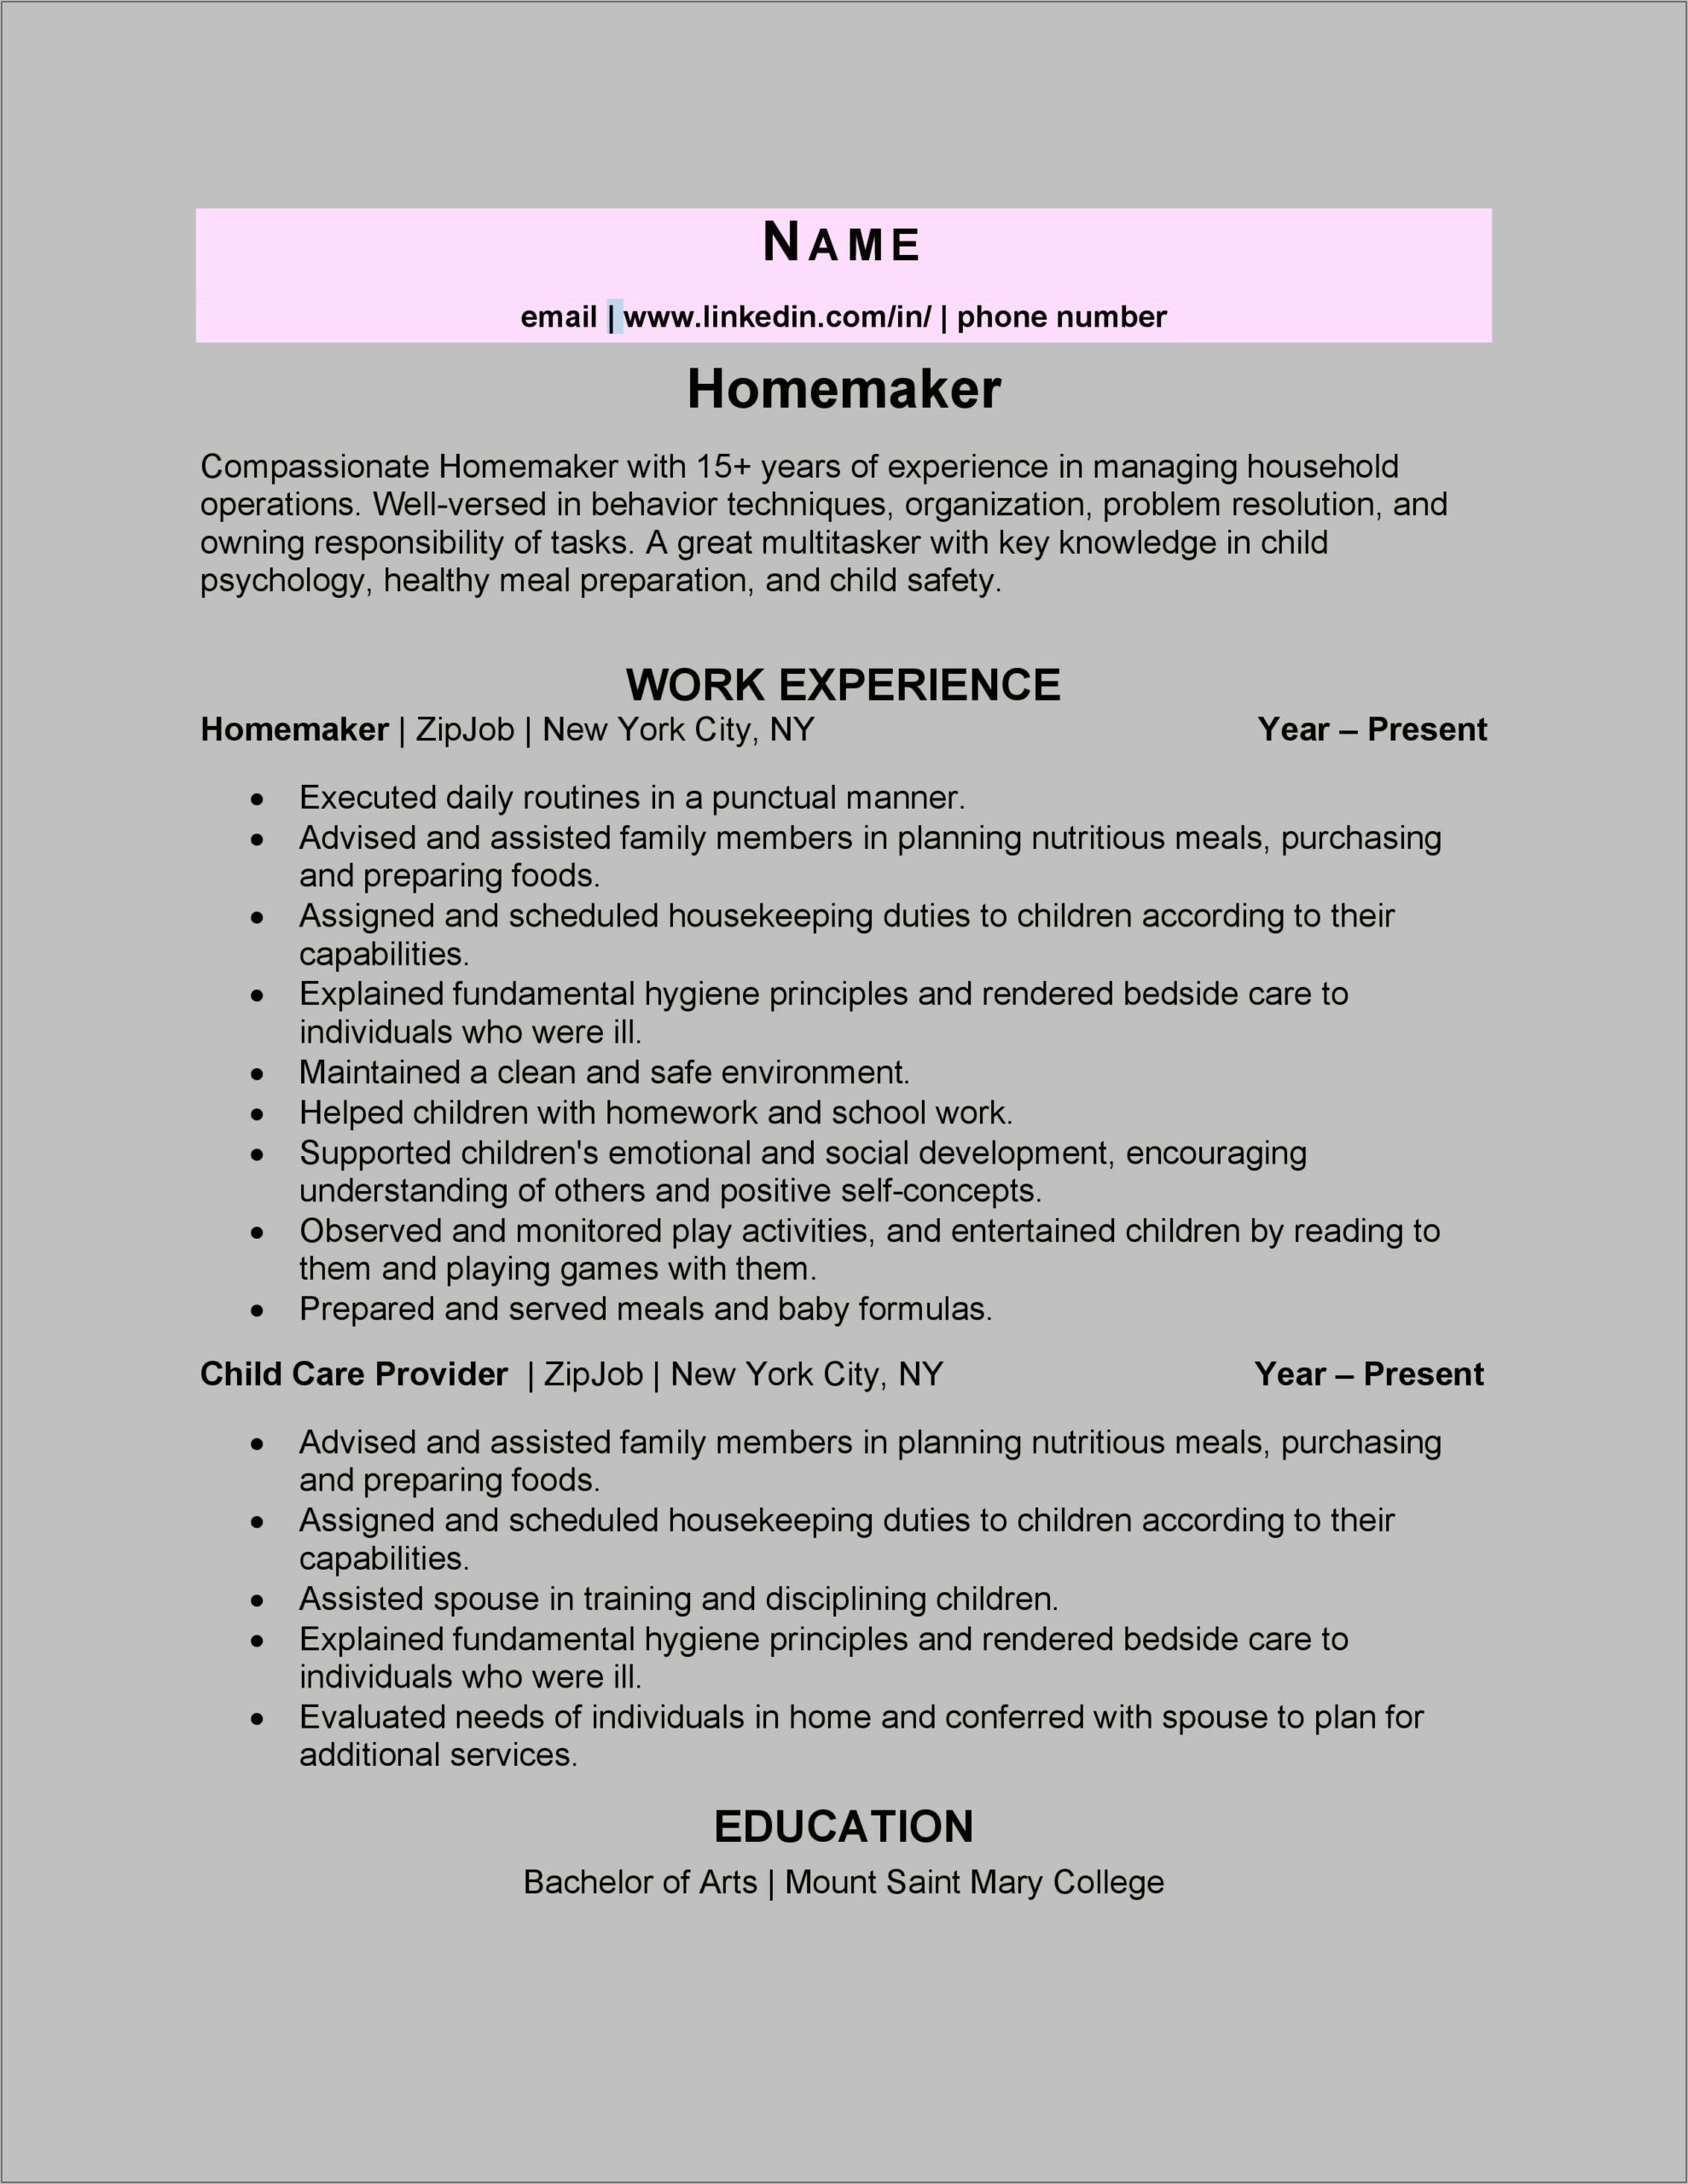 Resume Objective For Childrens Home